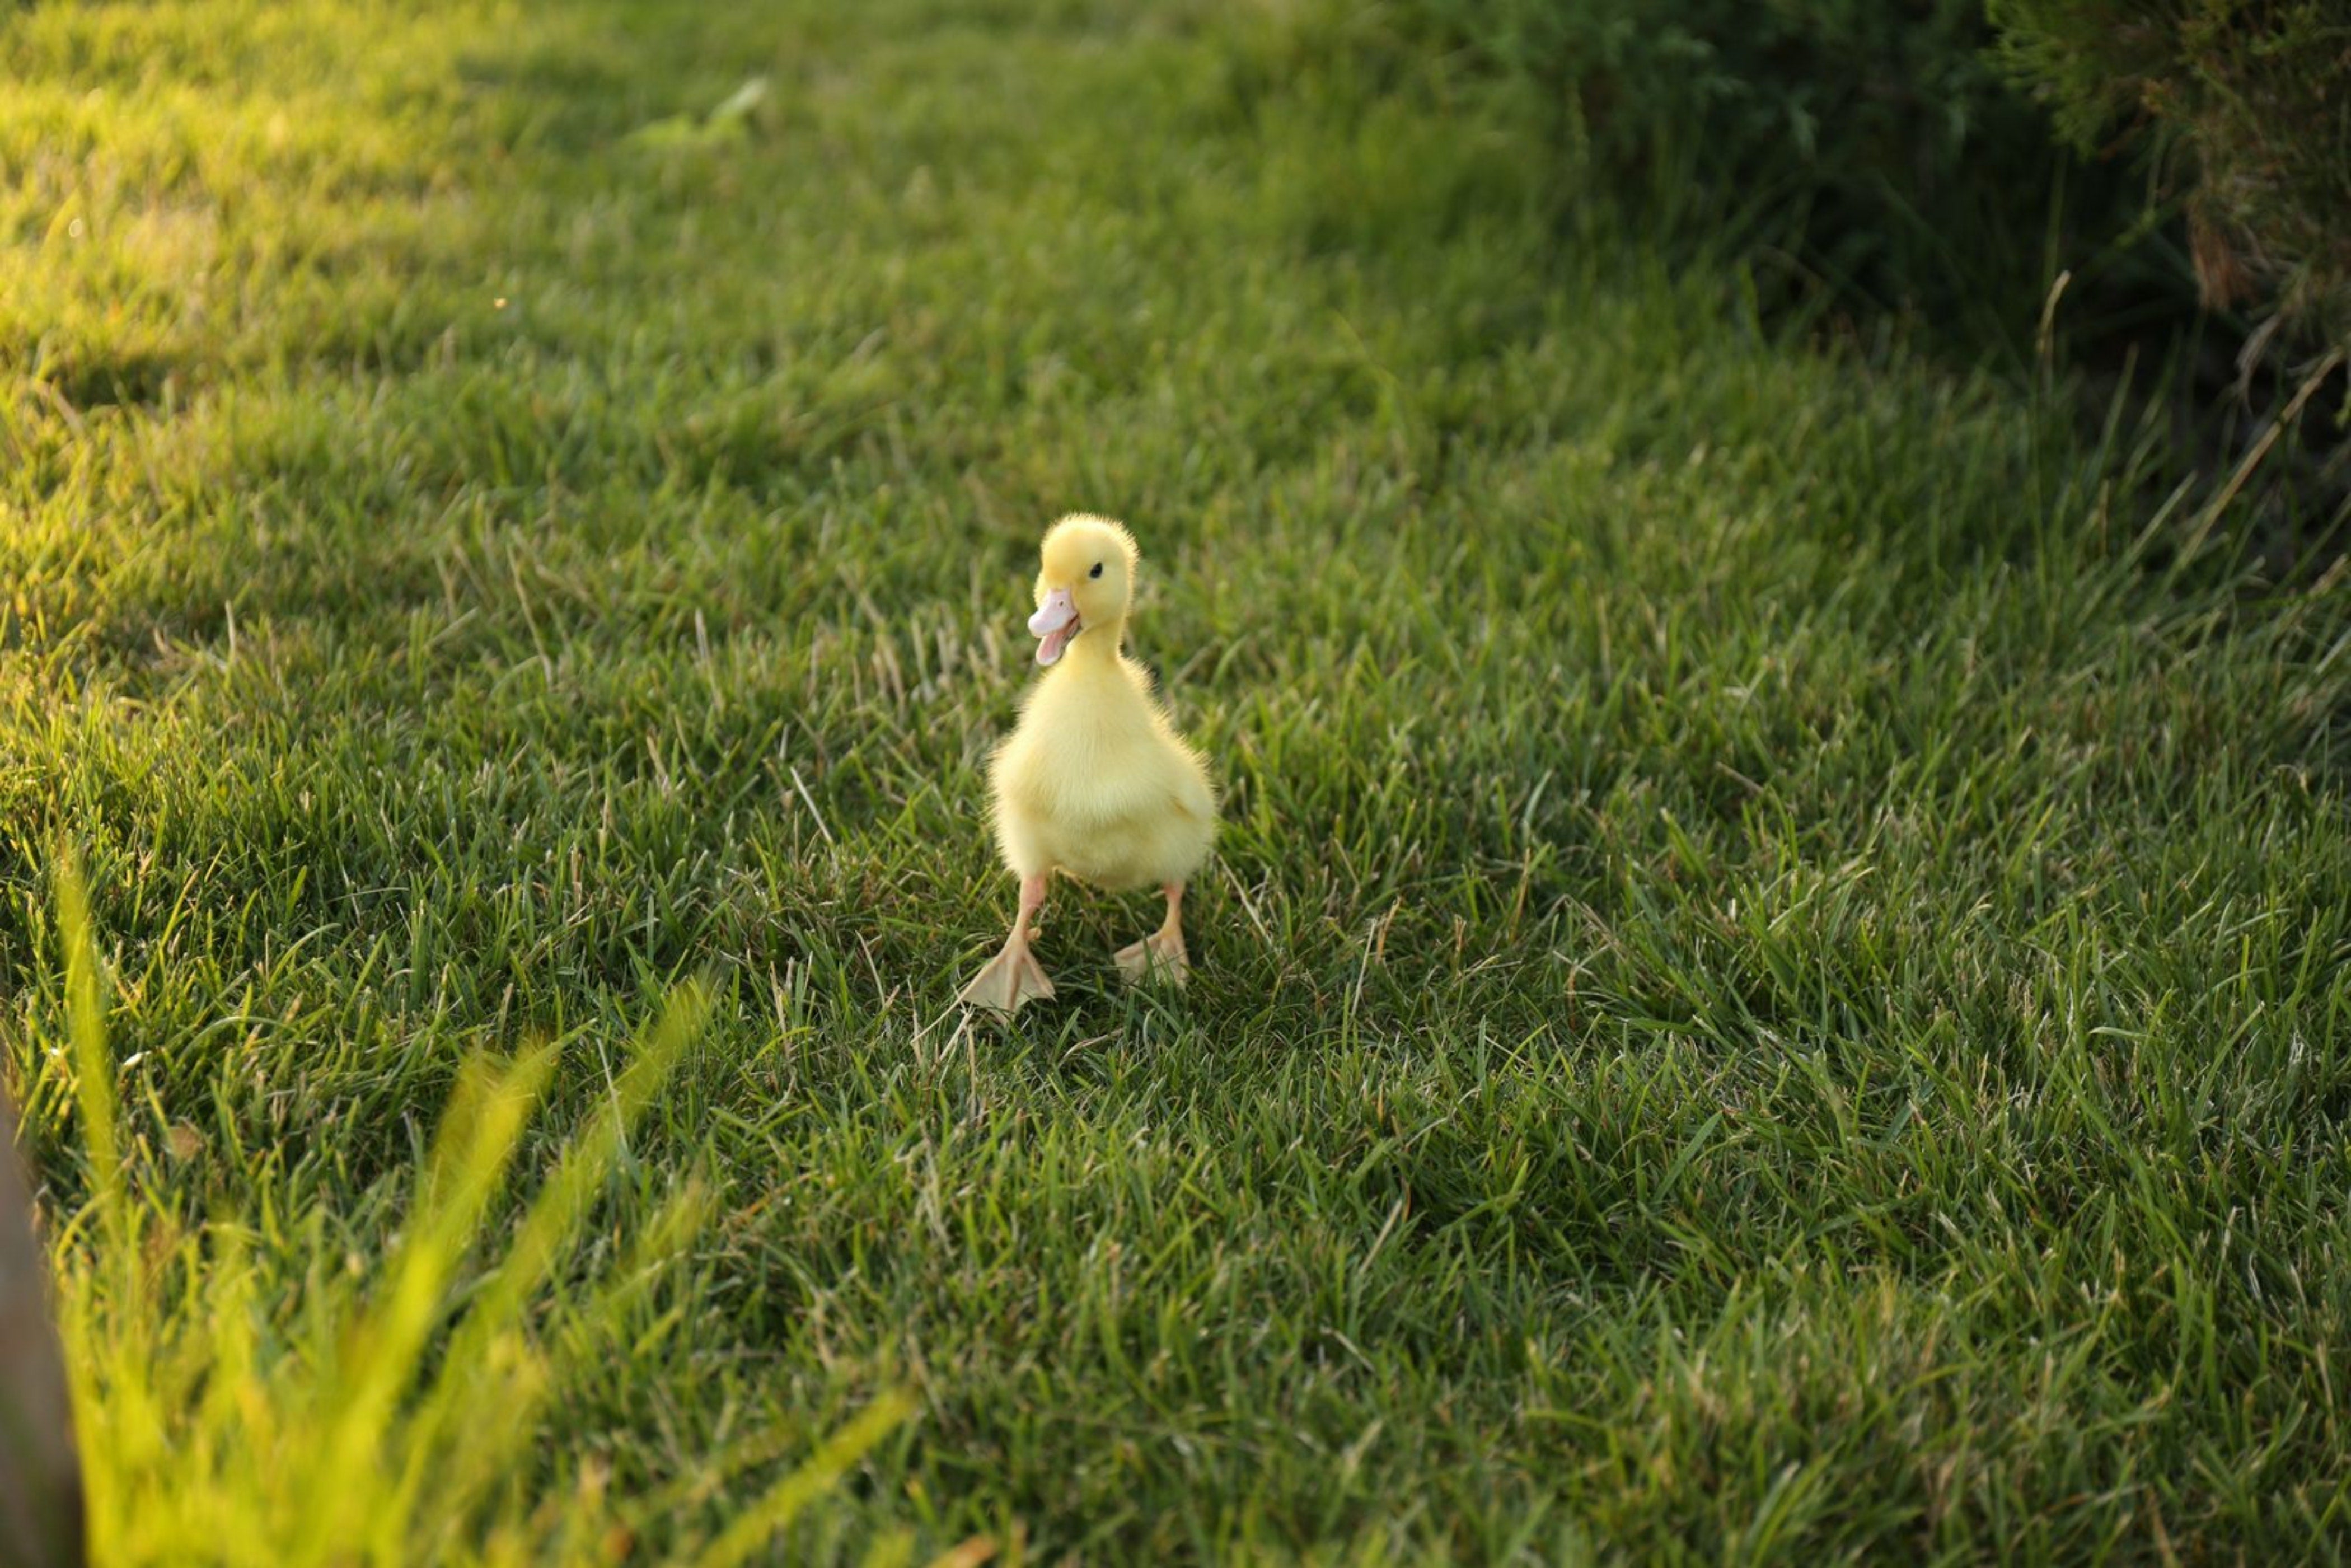 Why Duckling?